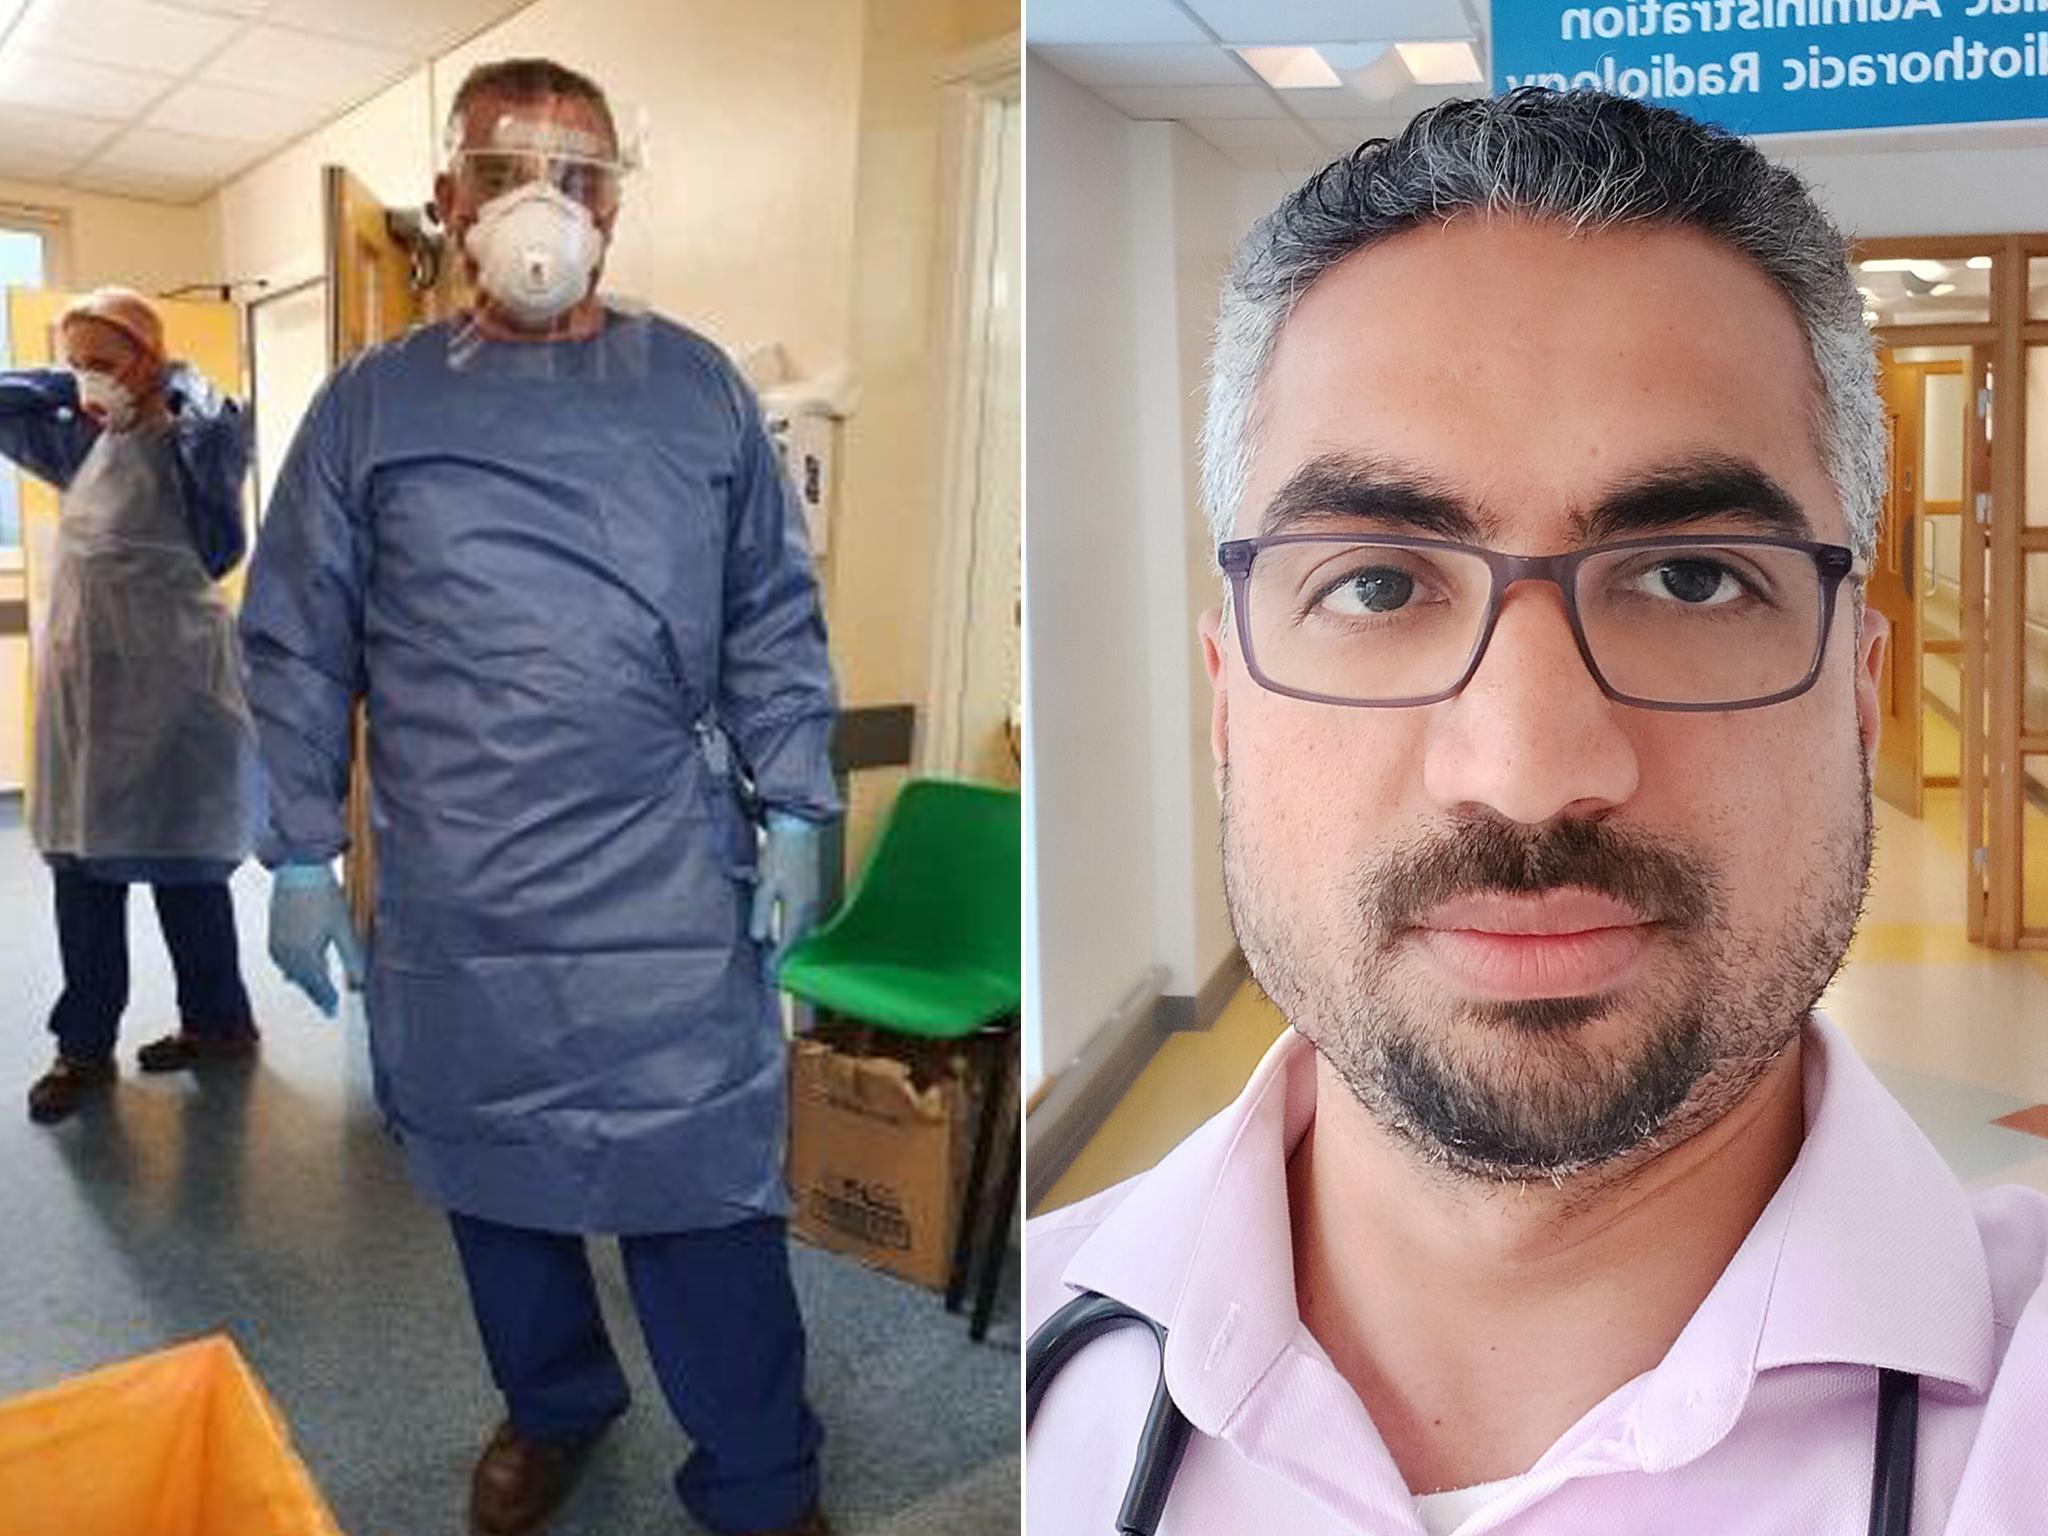 Dr Ahmad Alomar (left) and Dr Hamad Hawama (right) are both working as doctors in the NHS during the Covid-19 outbreak